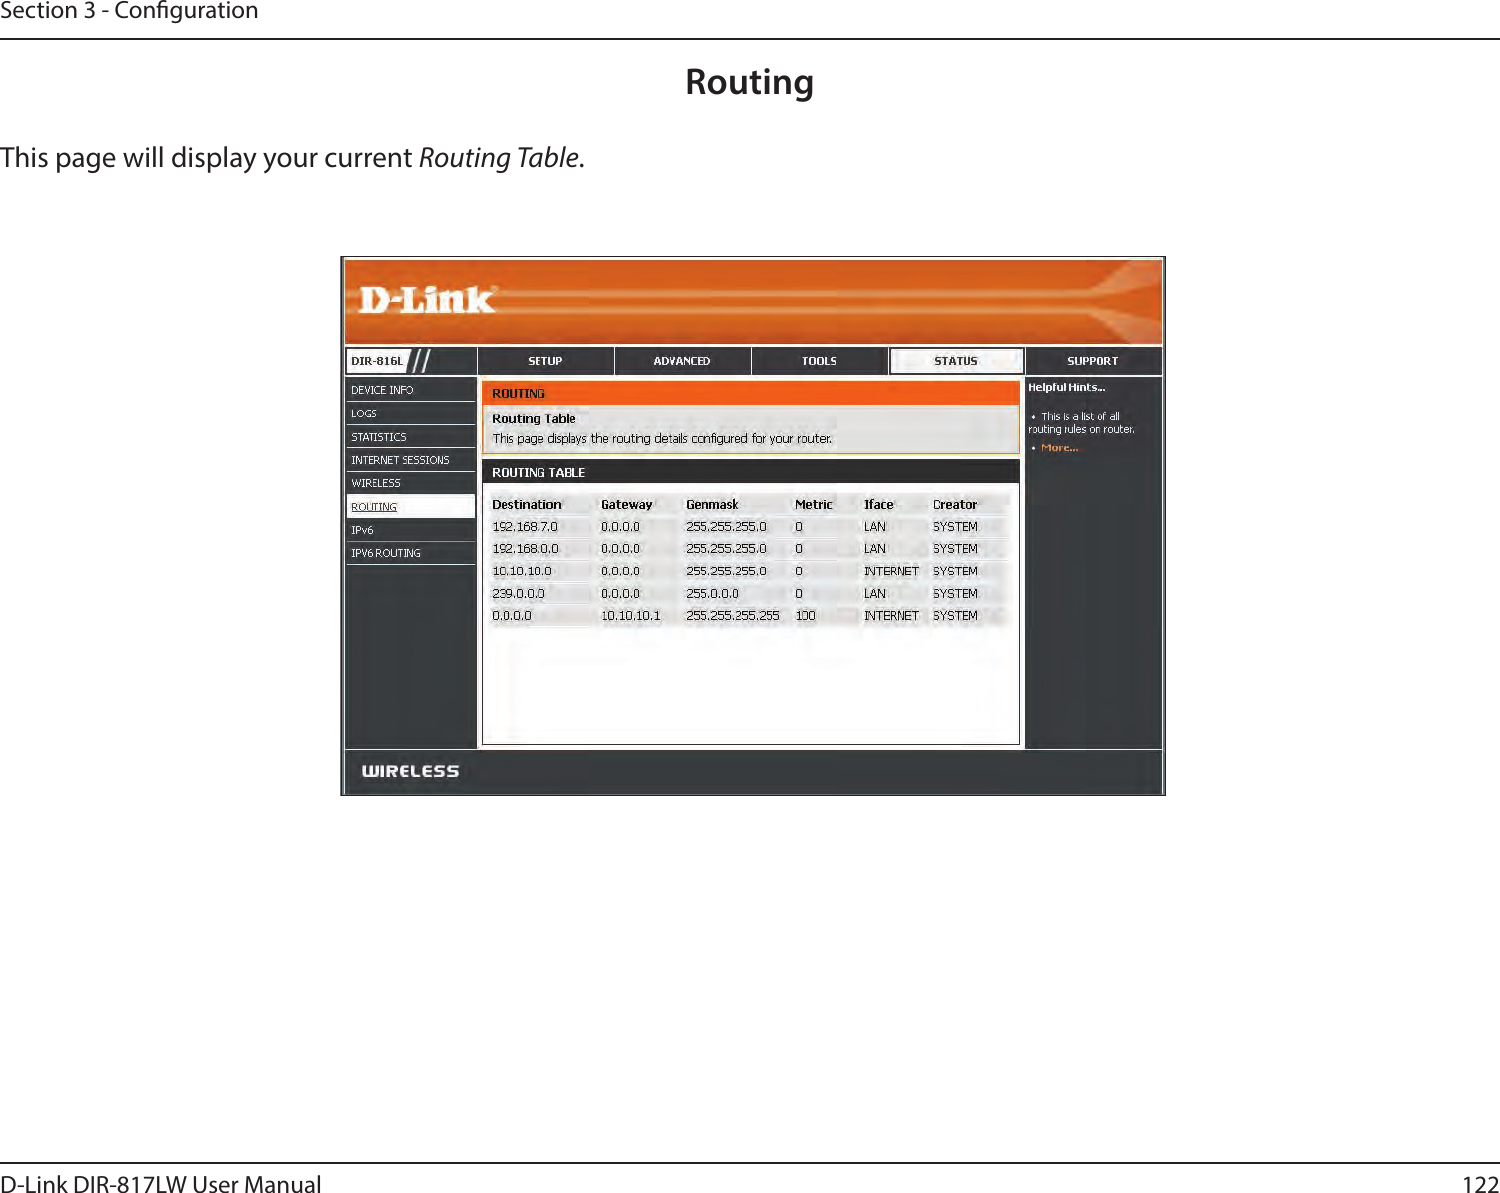 122D-Link DIR-817LW User ManualSection 3 - CongurationRoutingThis page will display your current Routing Table.